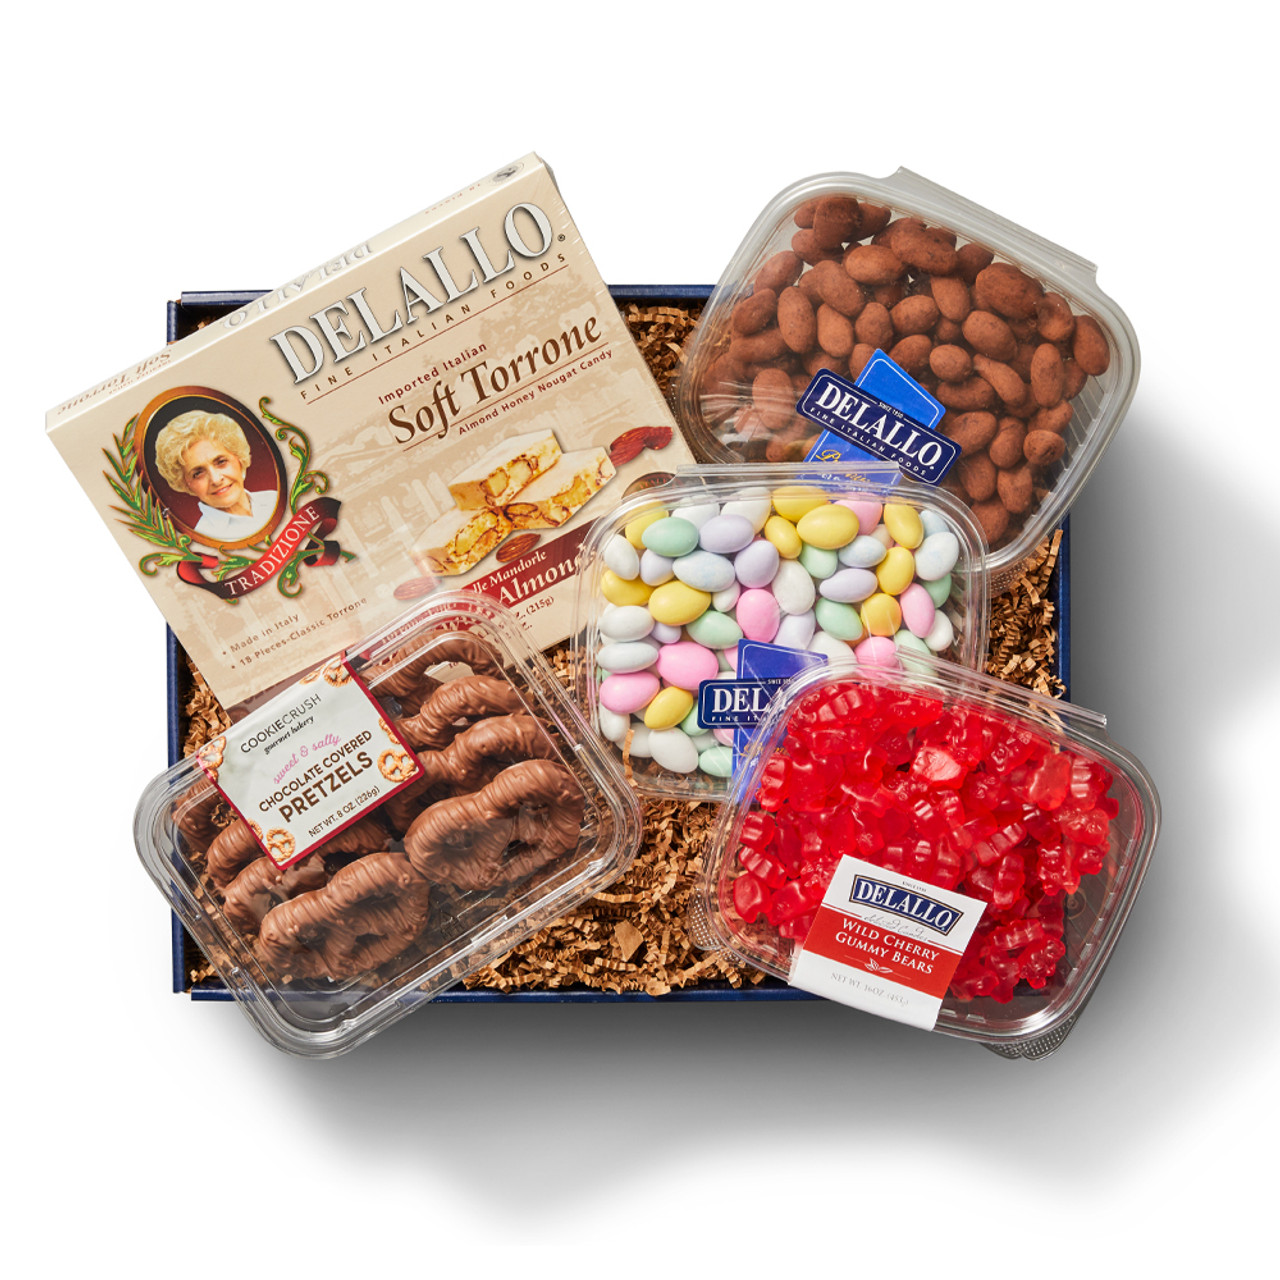  Italian Candy Gift Collection with chocolate pretzels, torrone, cherry gummies, Jordan almonds and cocoa dusted almonds Italian Candy Gift Collection